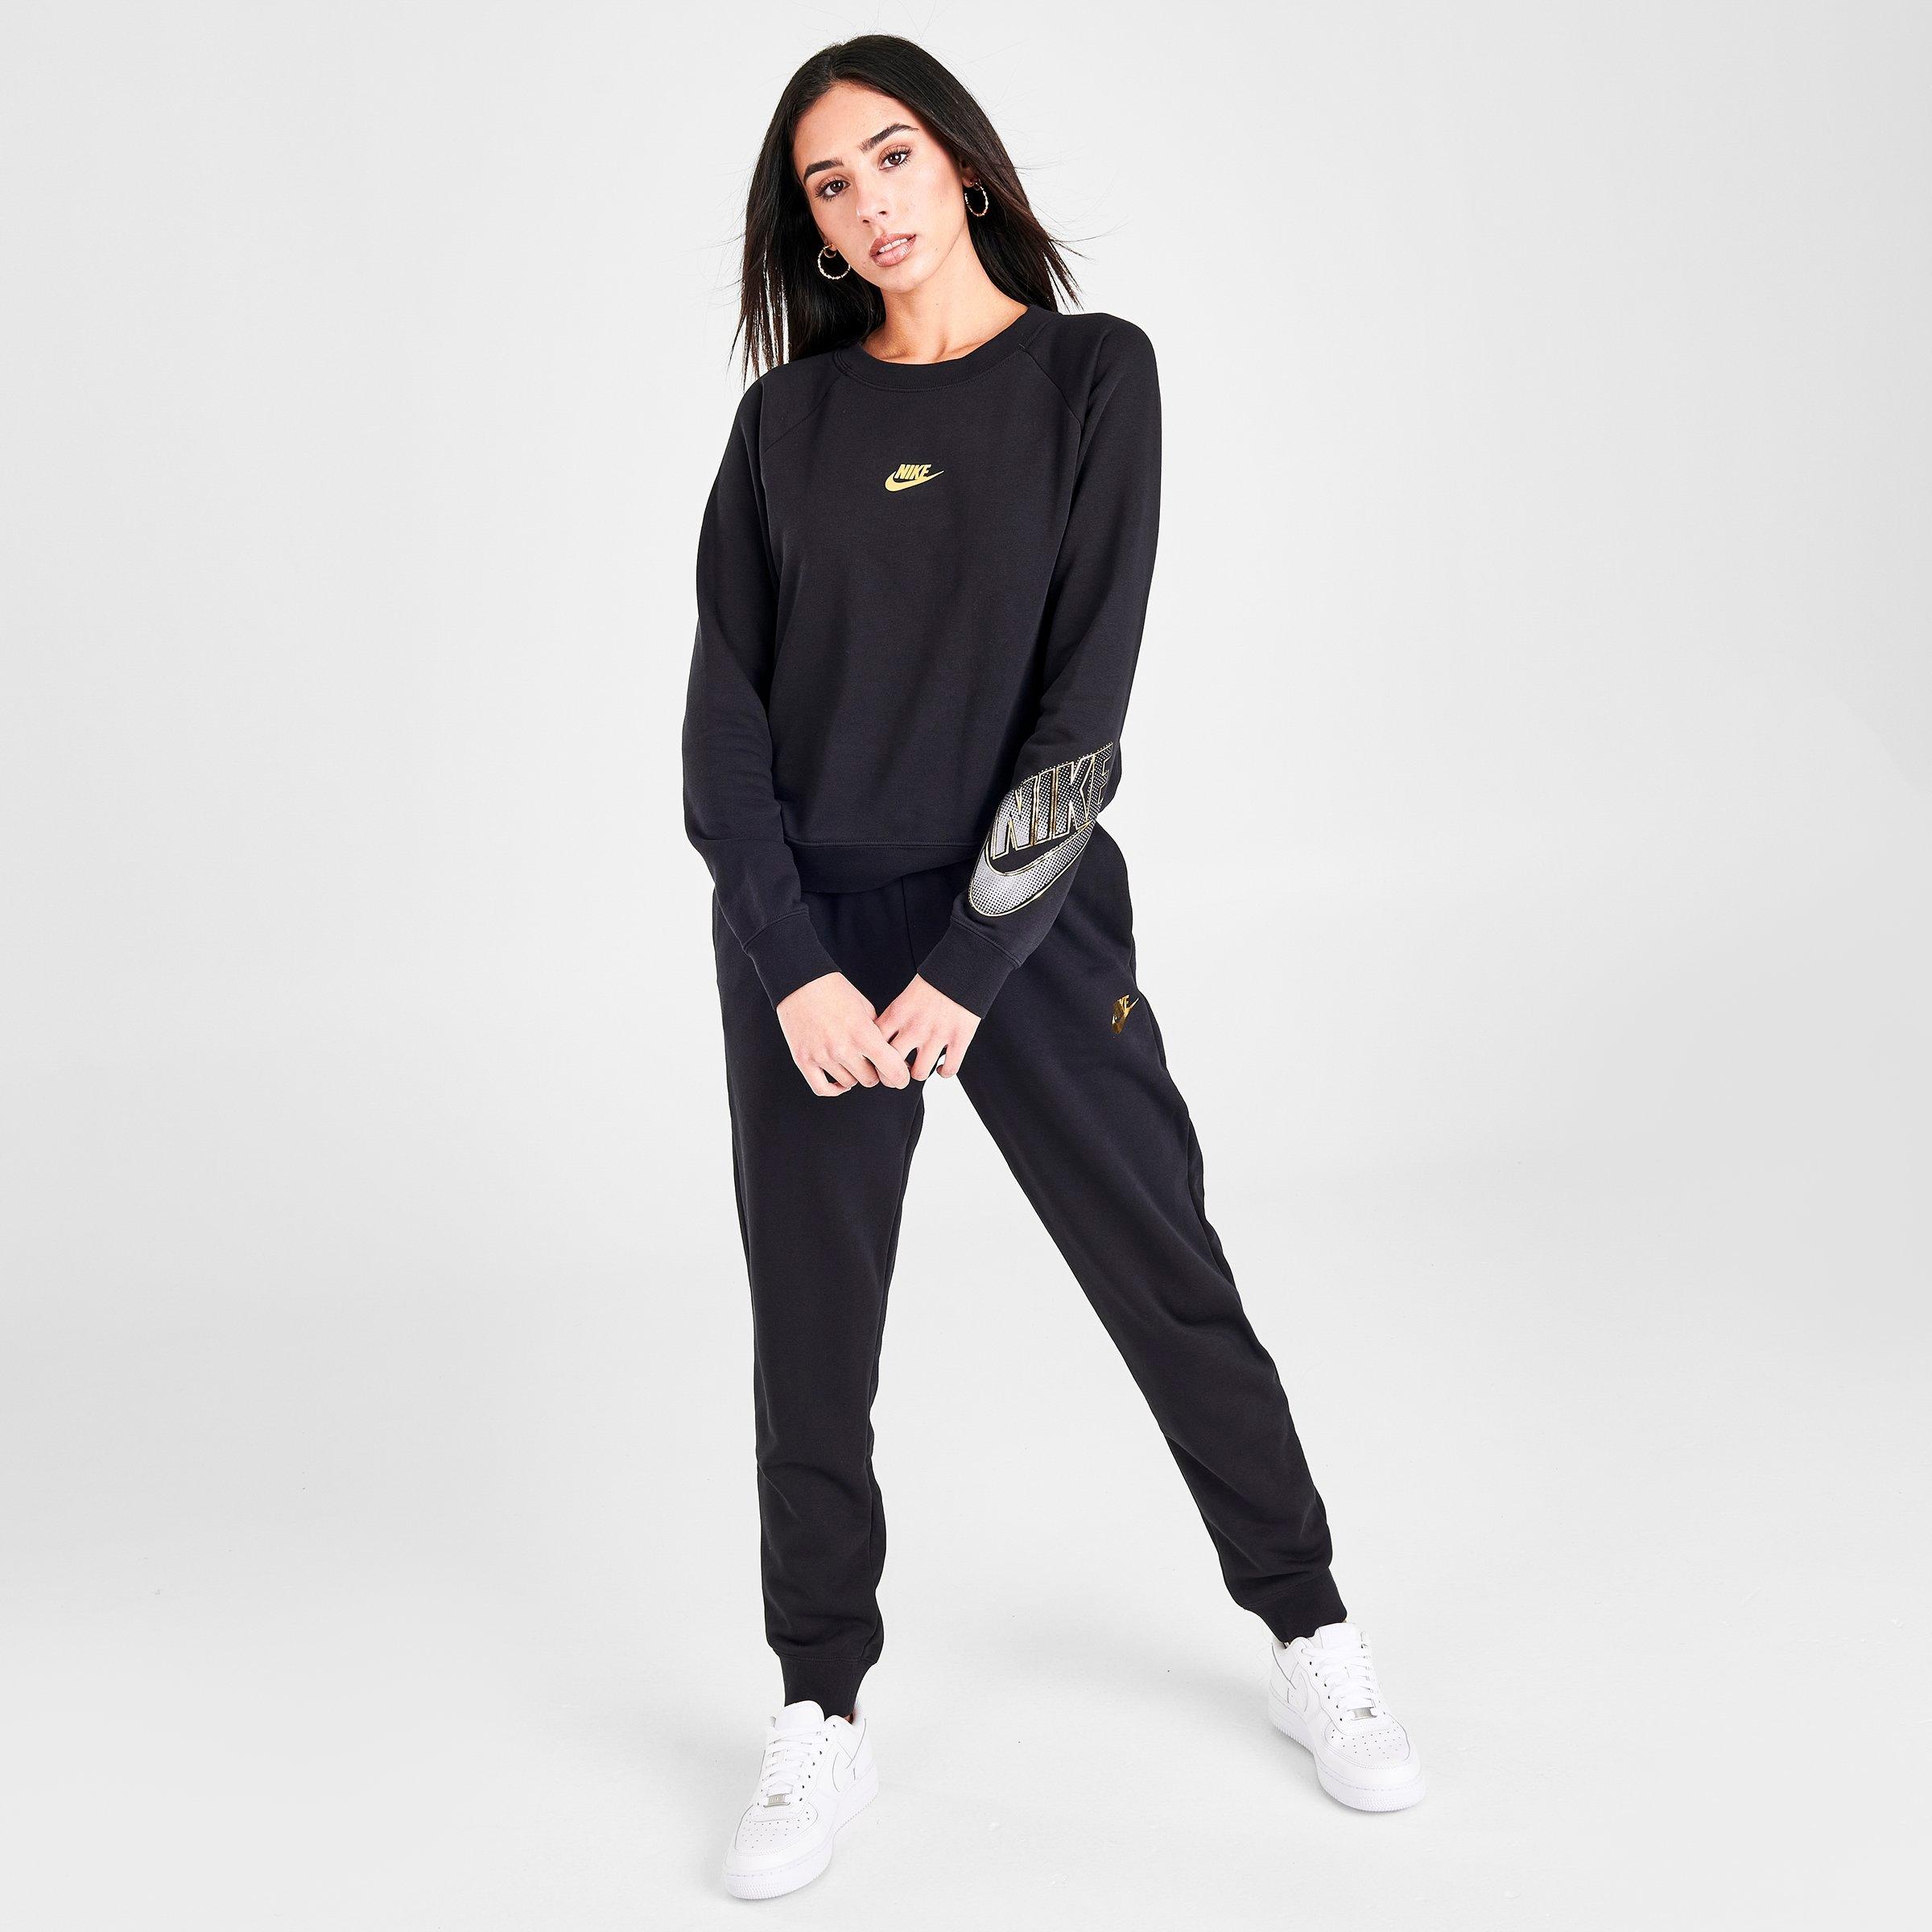 black and gold nike womens sweatsuit